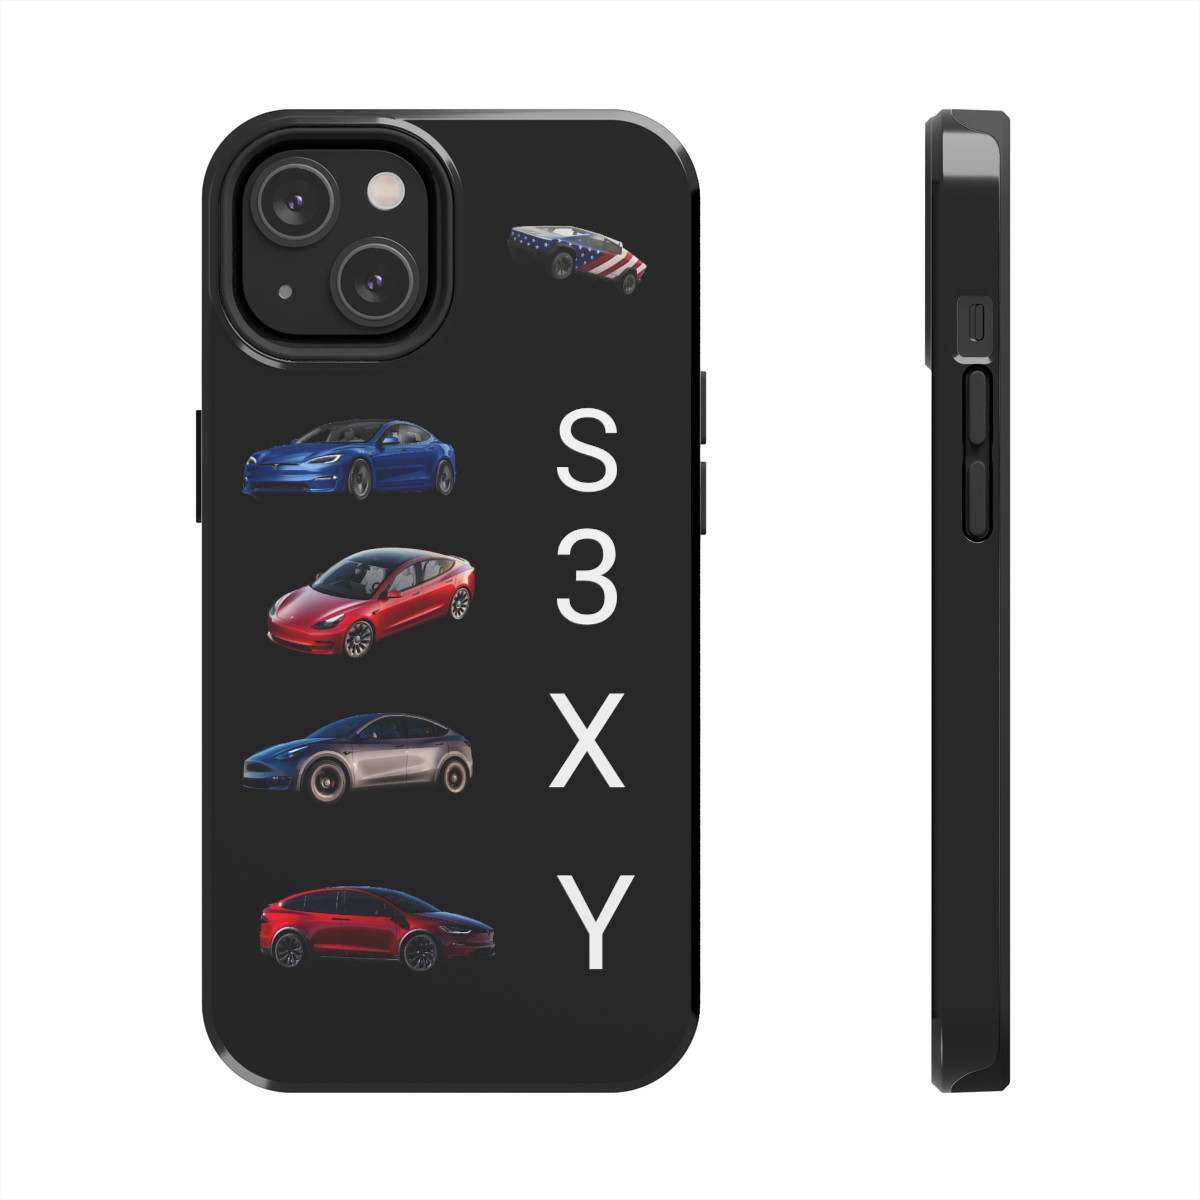 The S.3.X.Y Tough Phone Cases, Case-Mate product thumbnail image